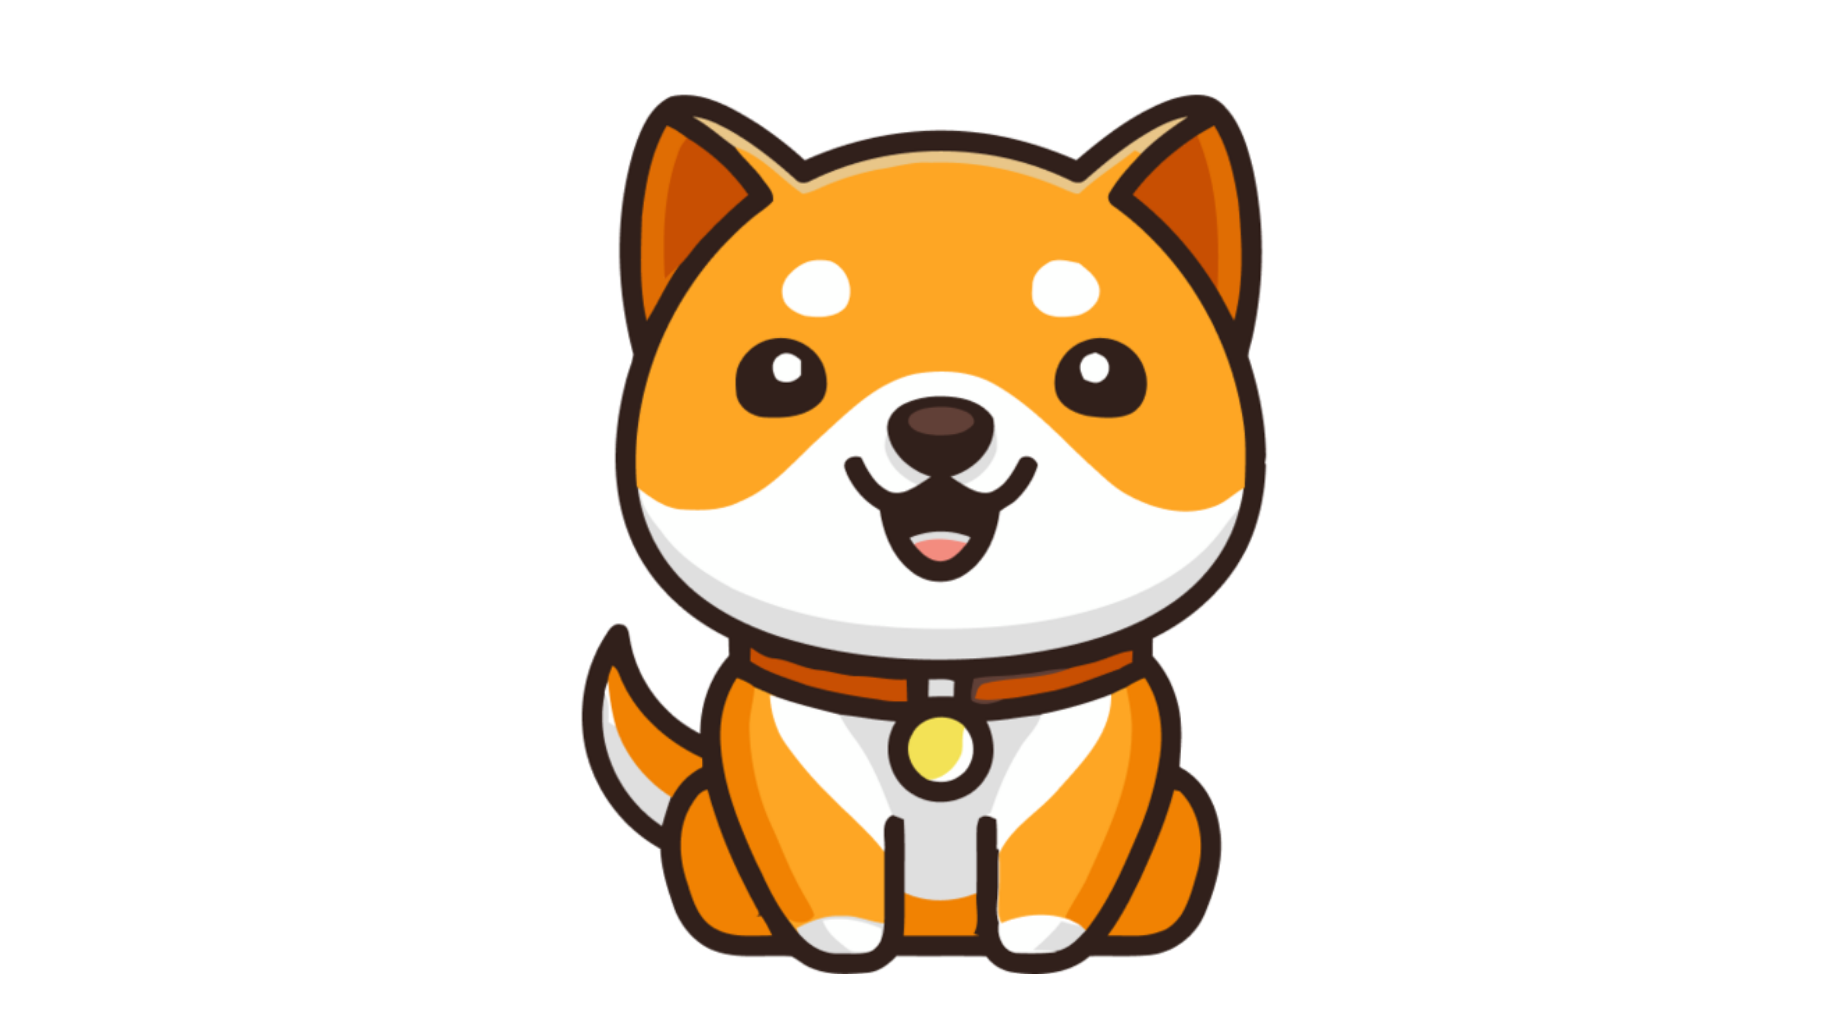 As Baby Doge Coin Enters 2nd Year, Here's What The Crypto Has In Store